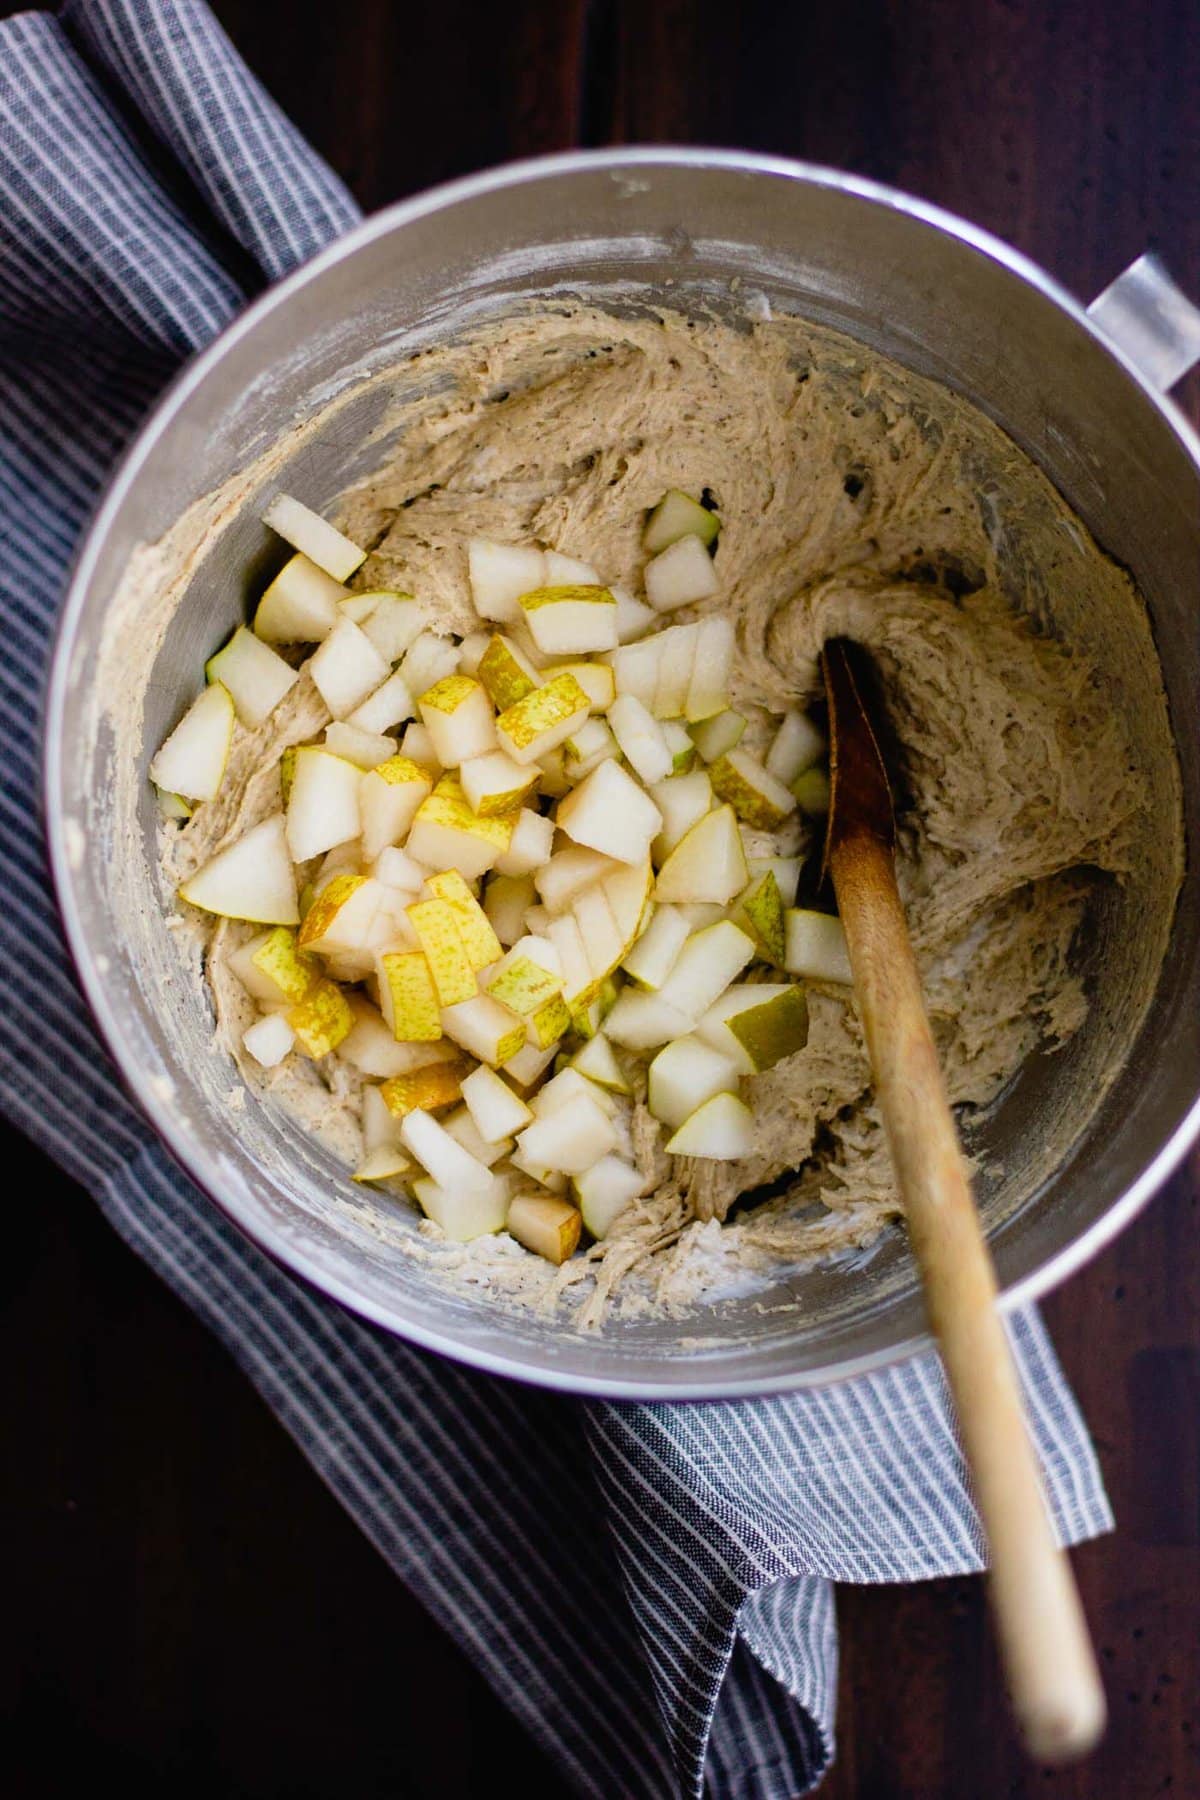 pear chunks have been added to the bowl of batter